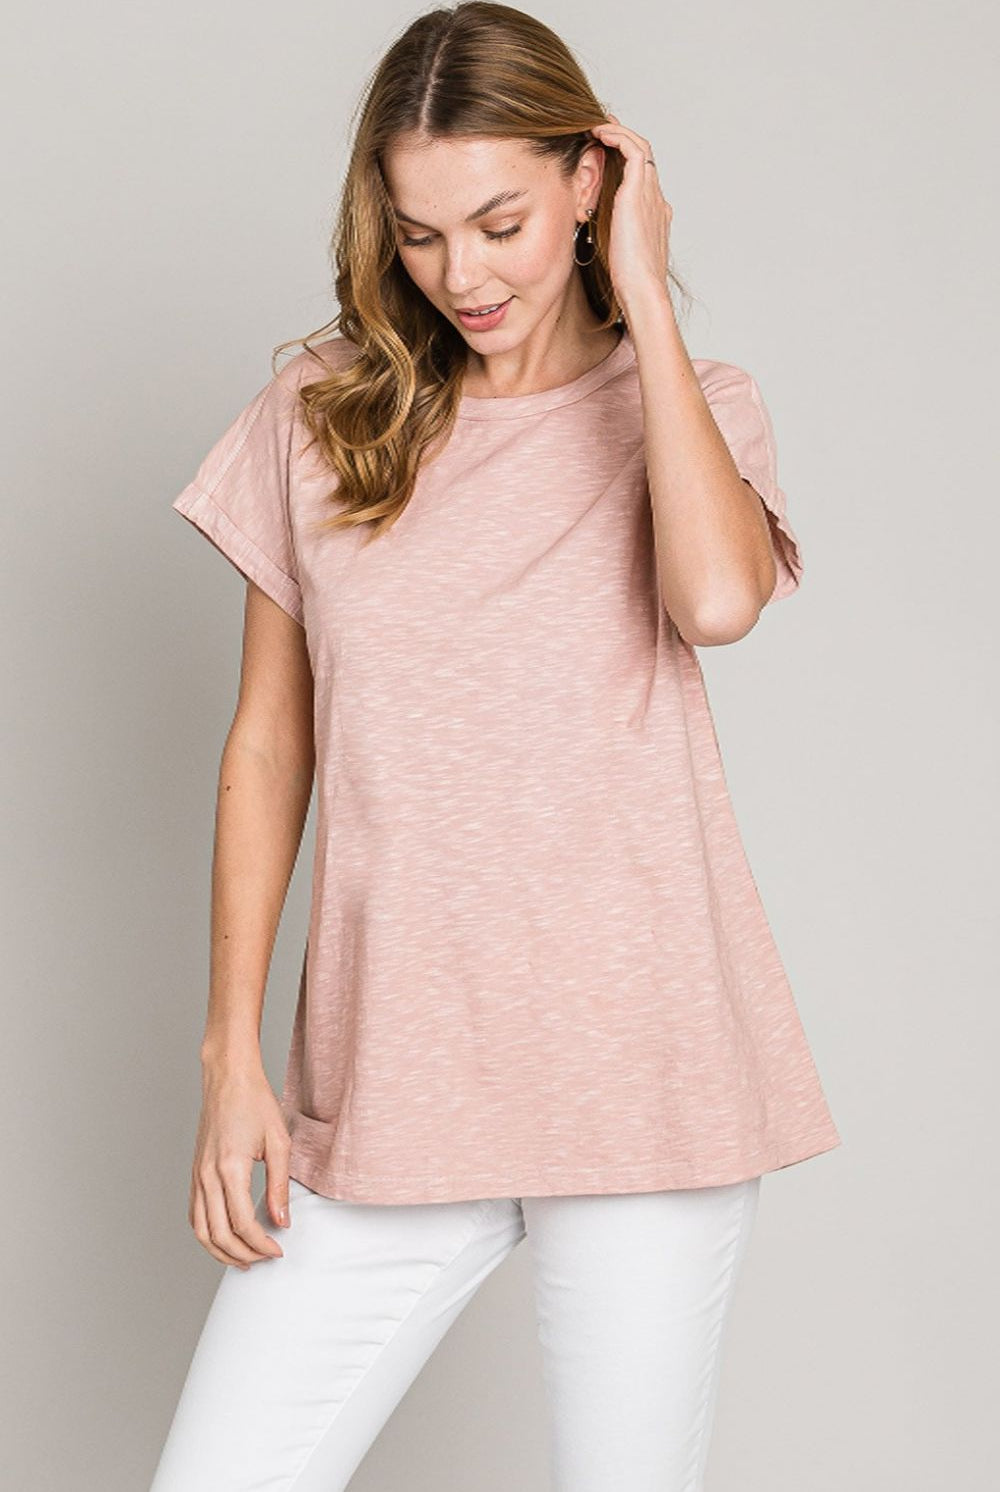 A woman in a casual, mauve cotton t-shirt, paired with white pants for a relaxed and stylish everyday look.